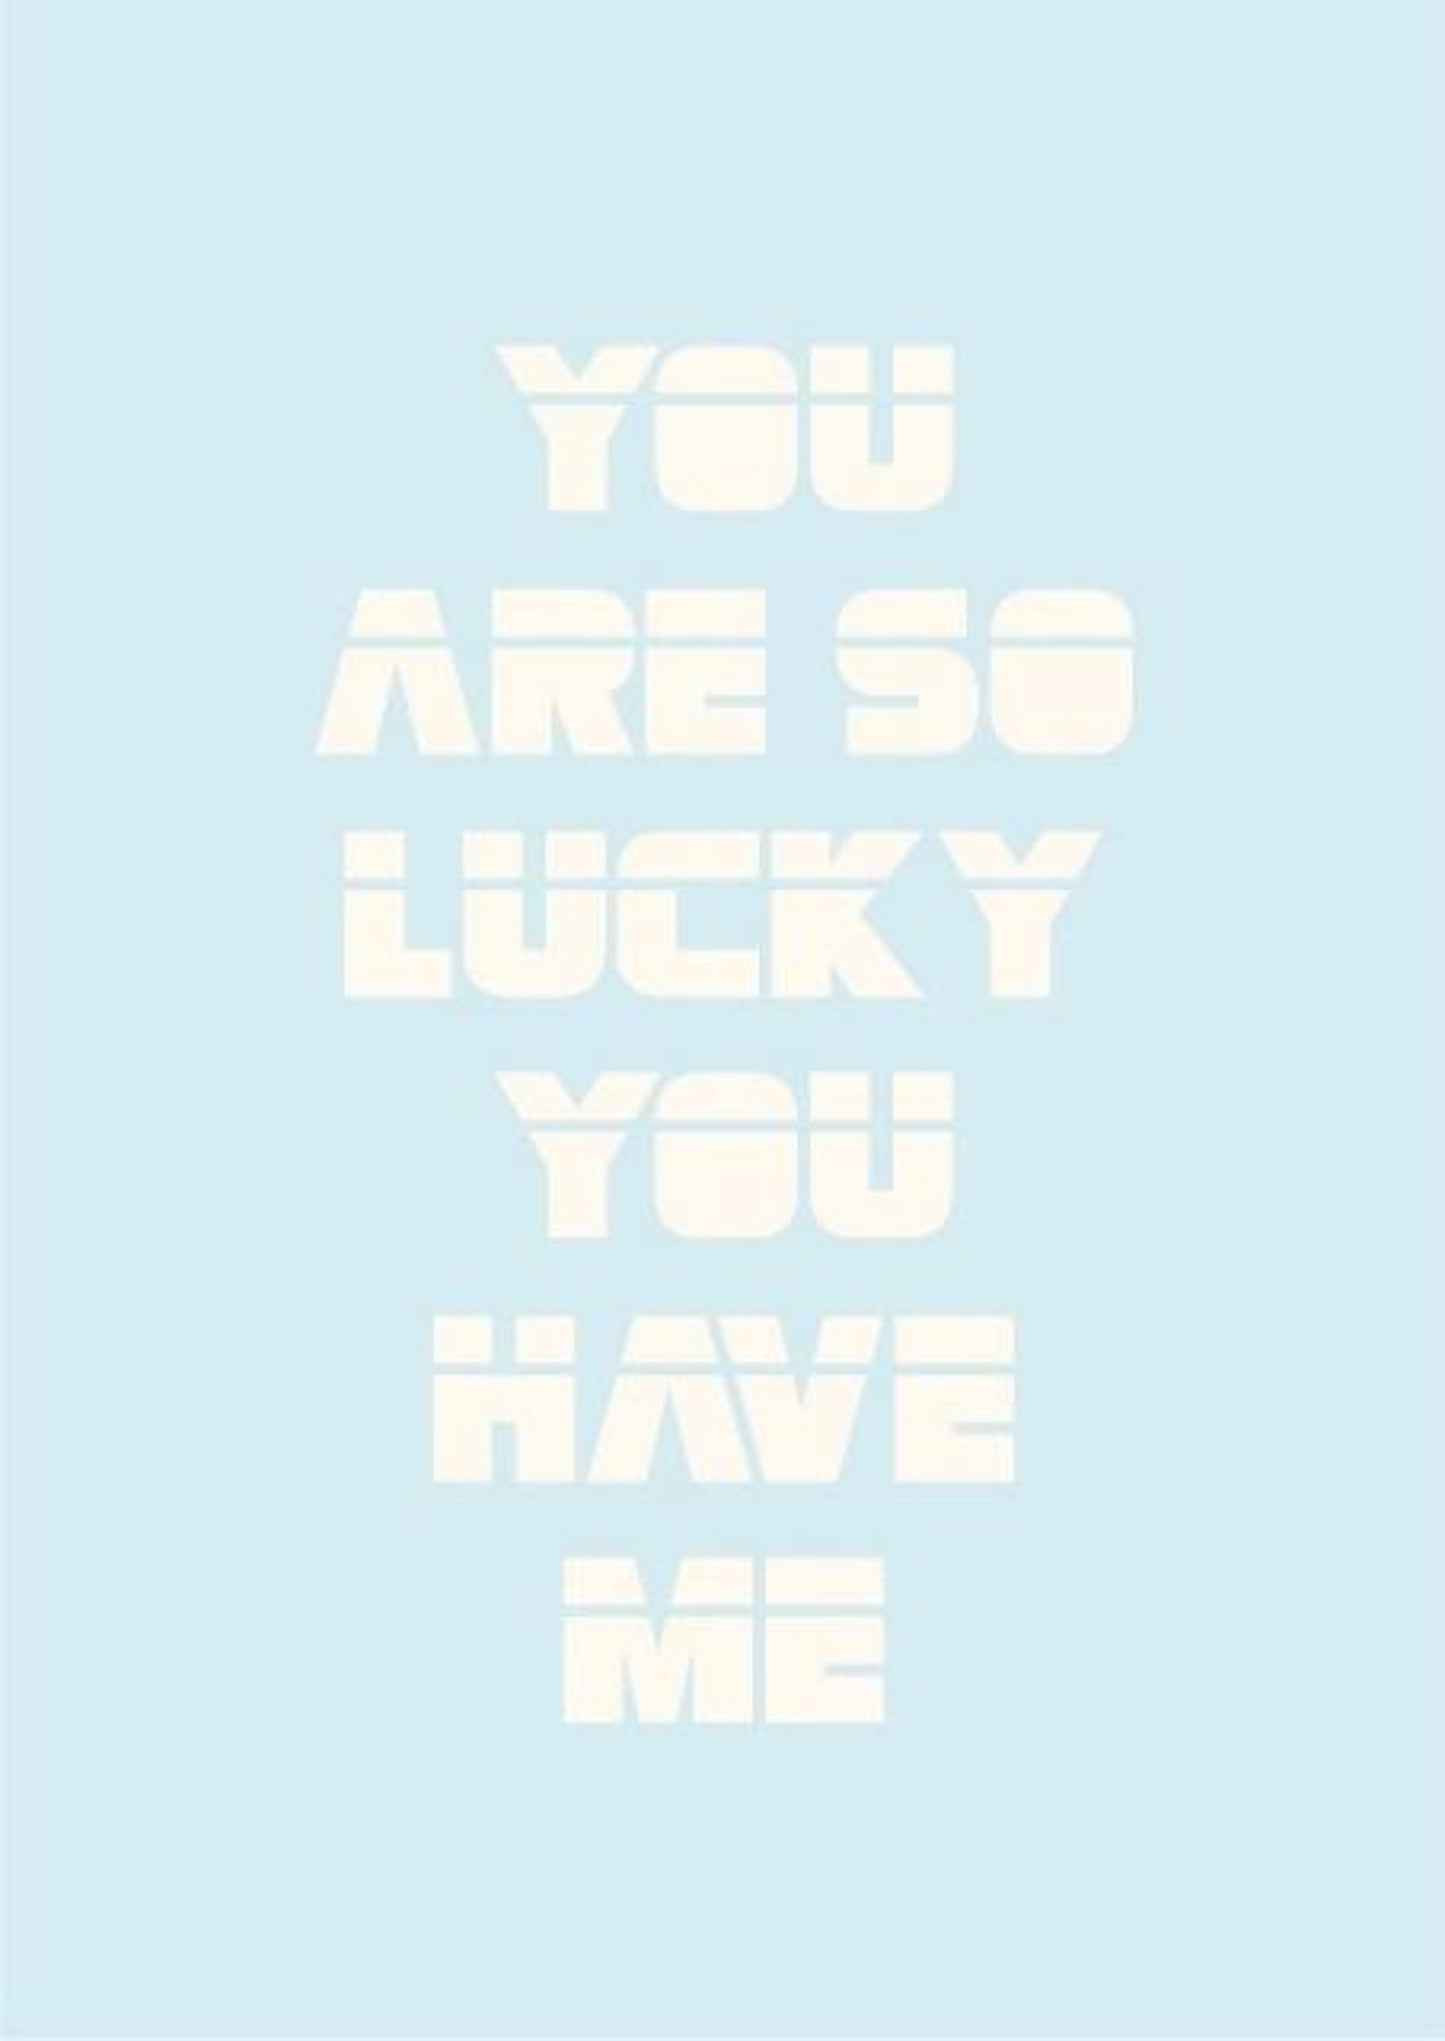 You are so lucky you have me.